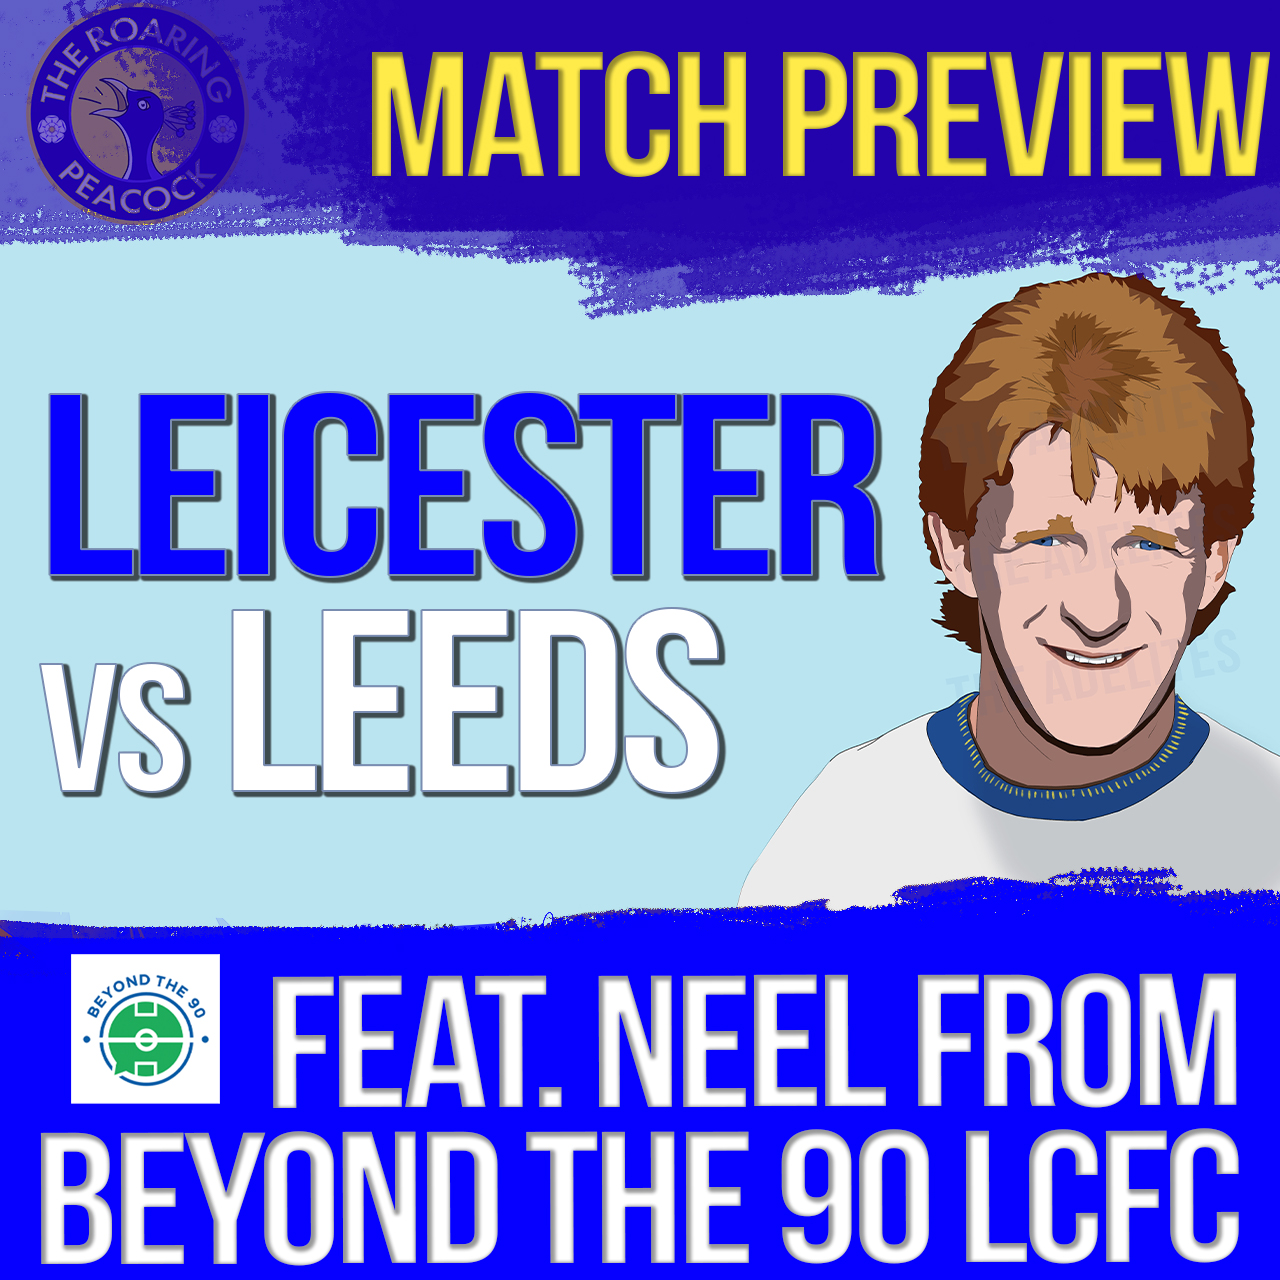 Leicester City vs Leeds United | Match Preview #20